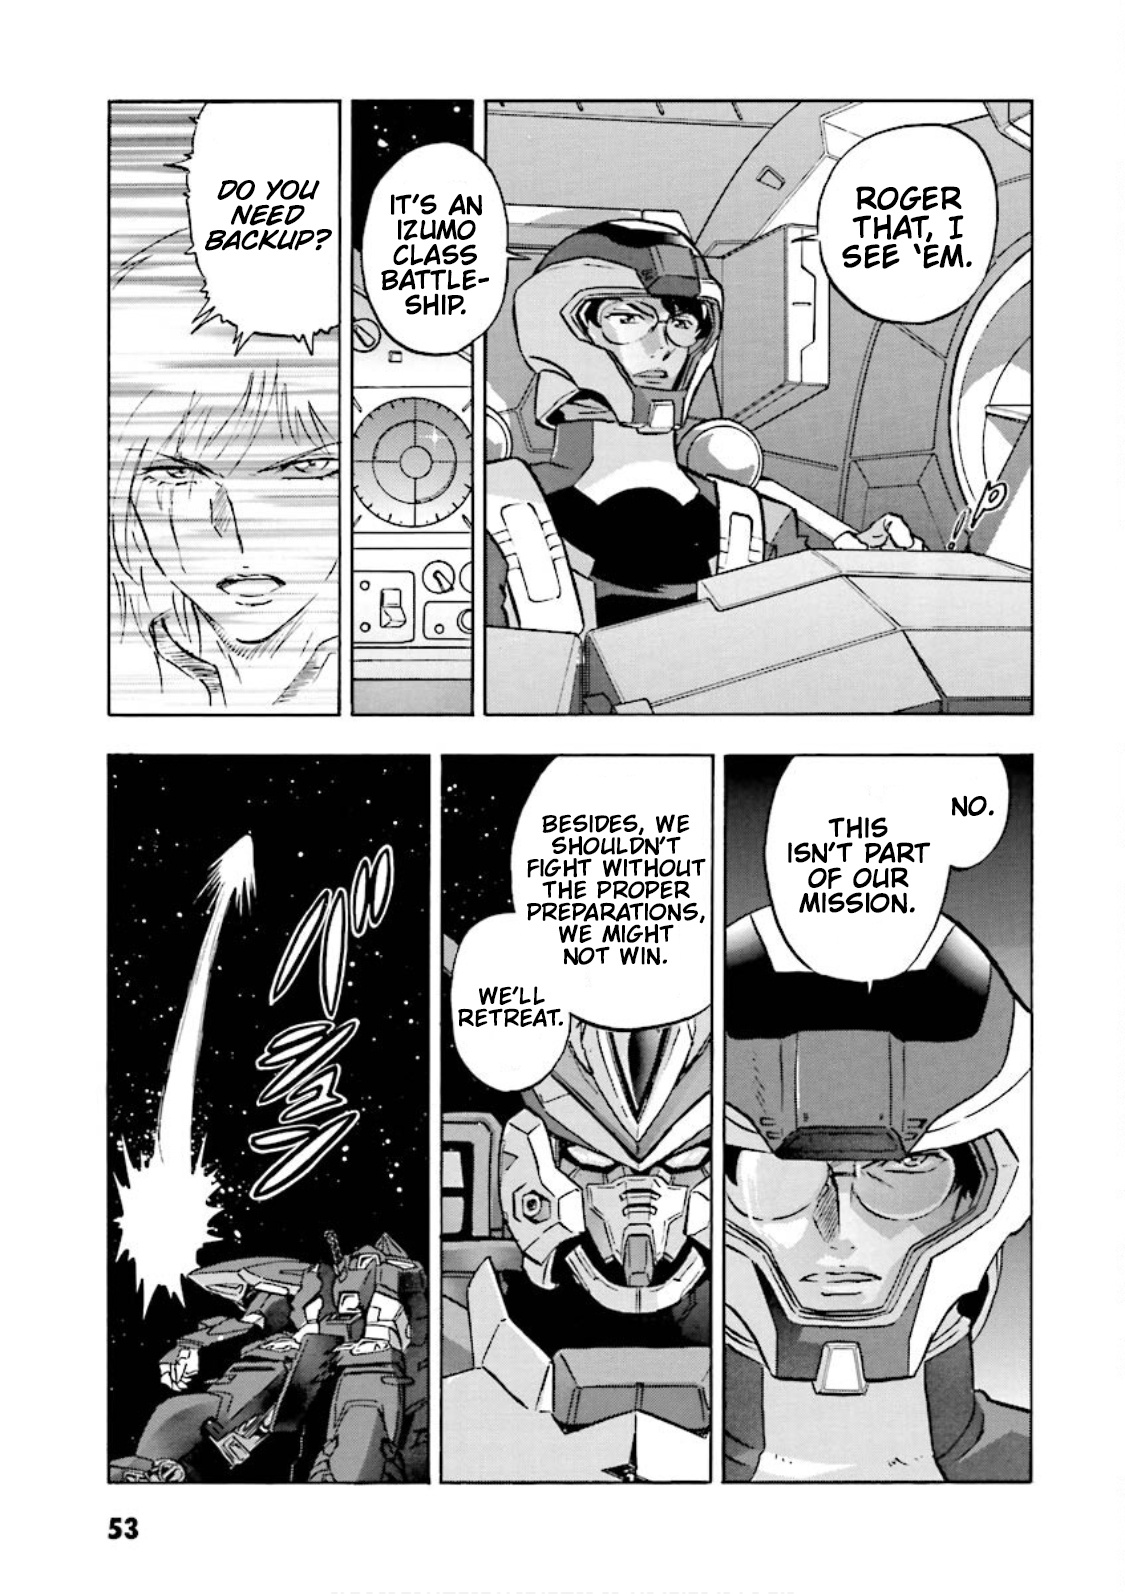 Mobile Suit Gundam Seed Astray Re:master Edition Vol.4 Chapter 16: The Explorer - Picture 3